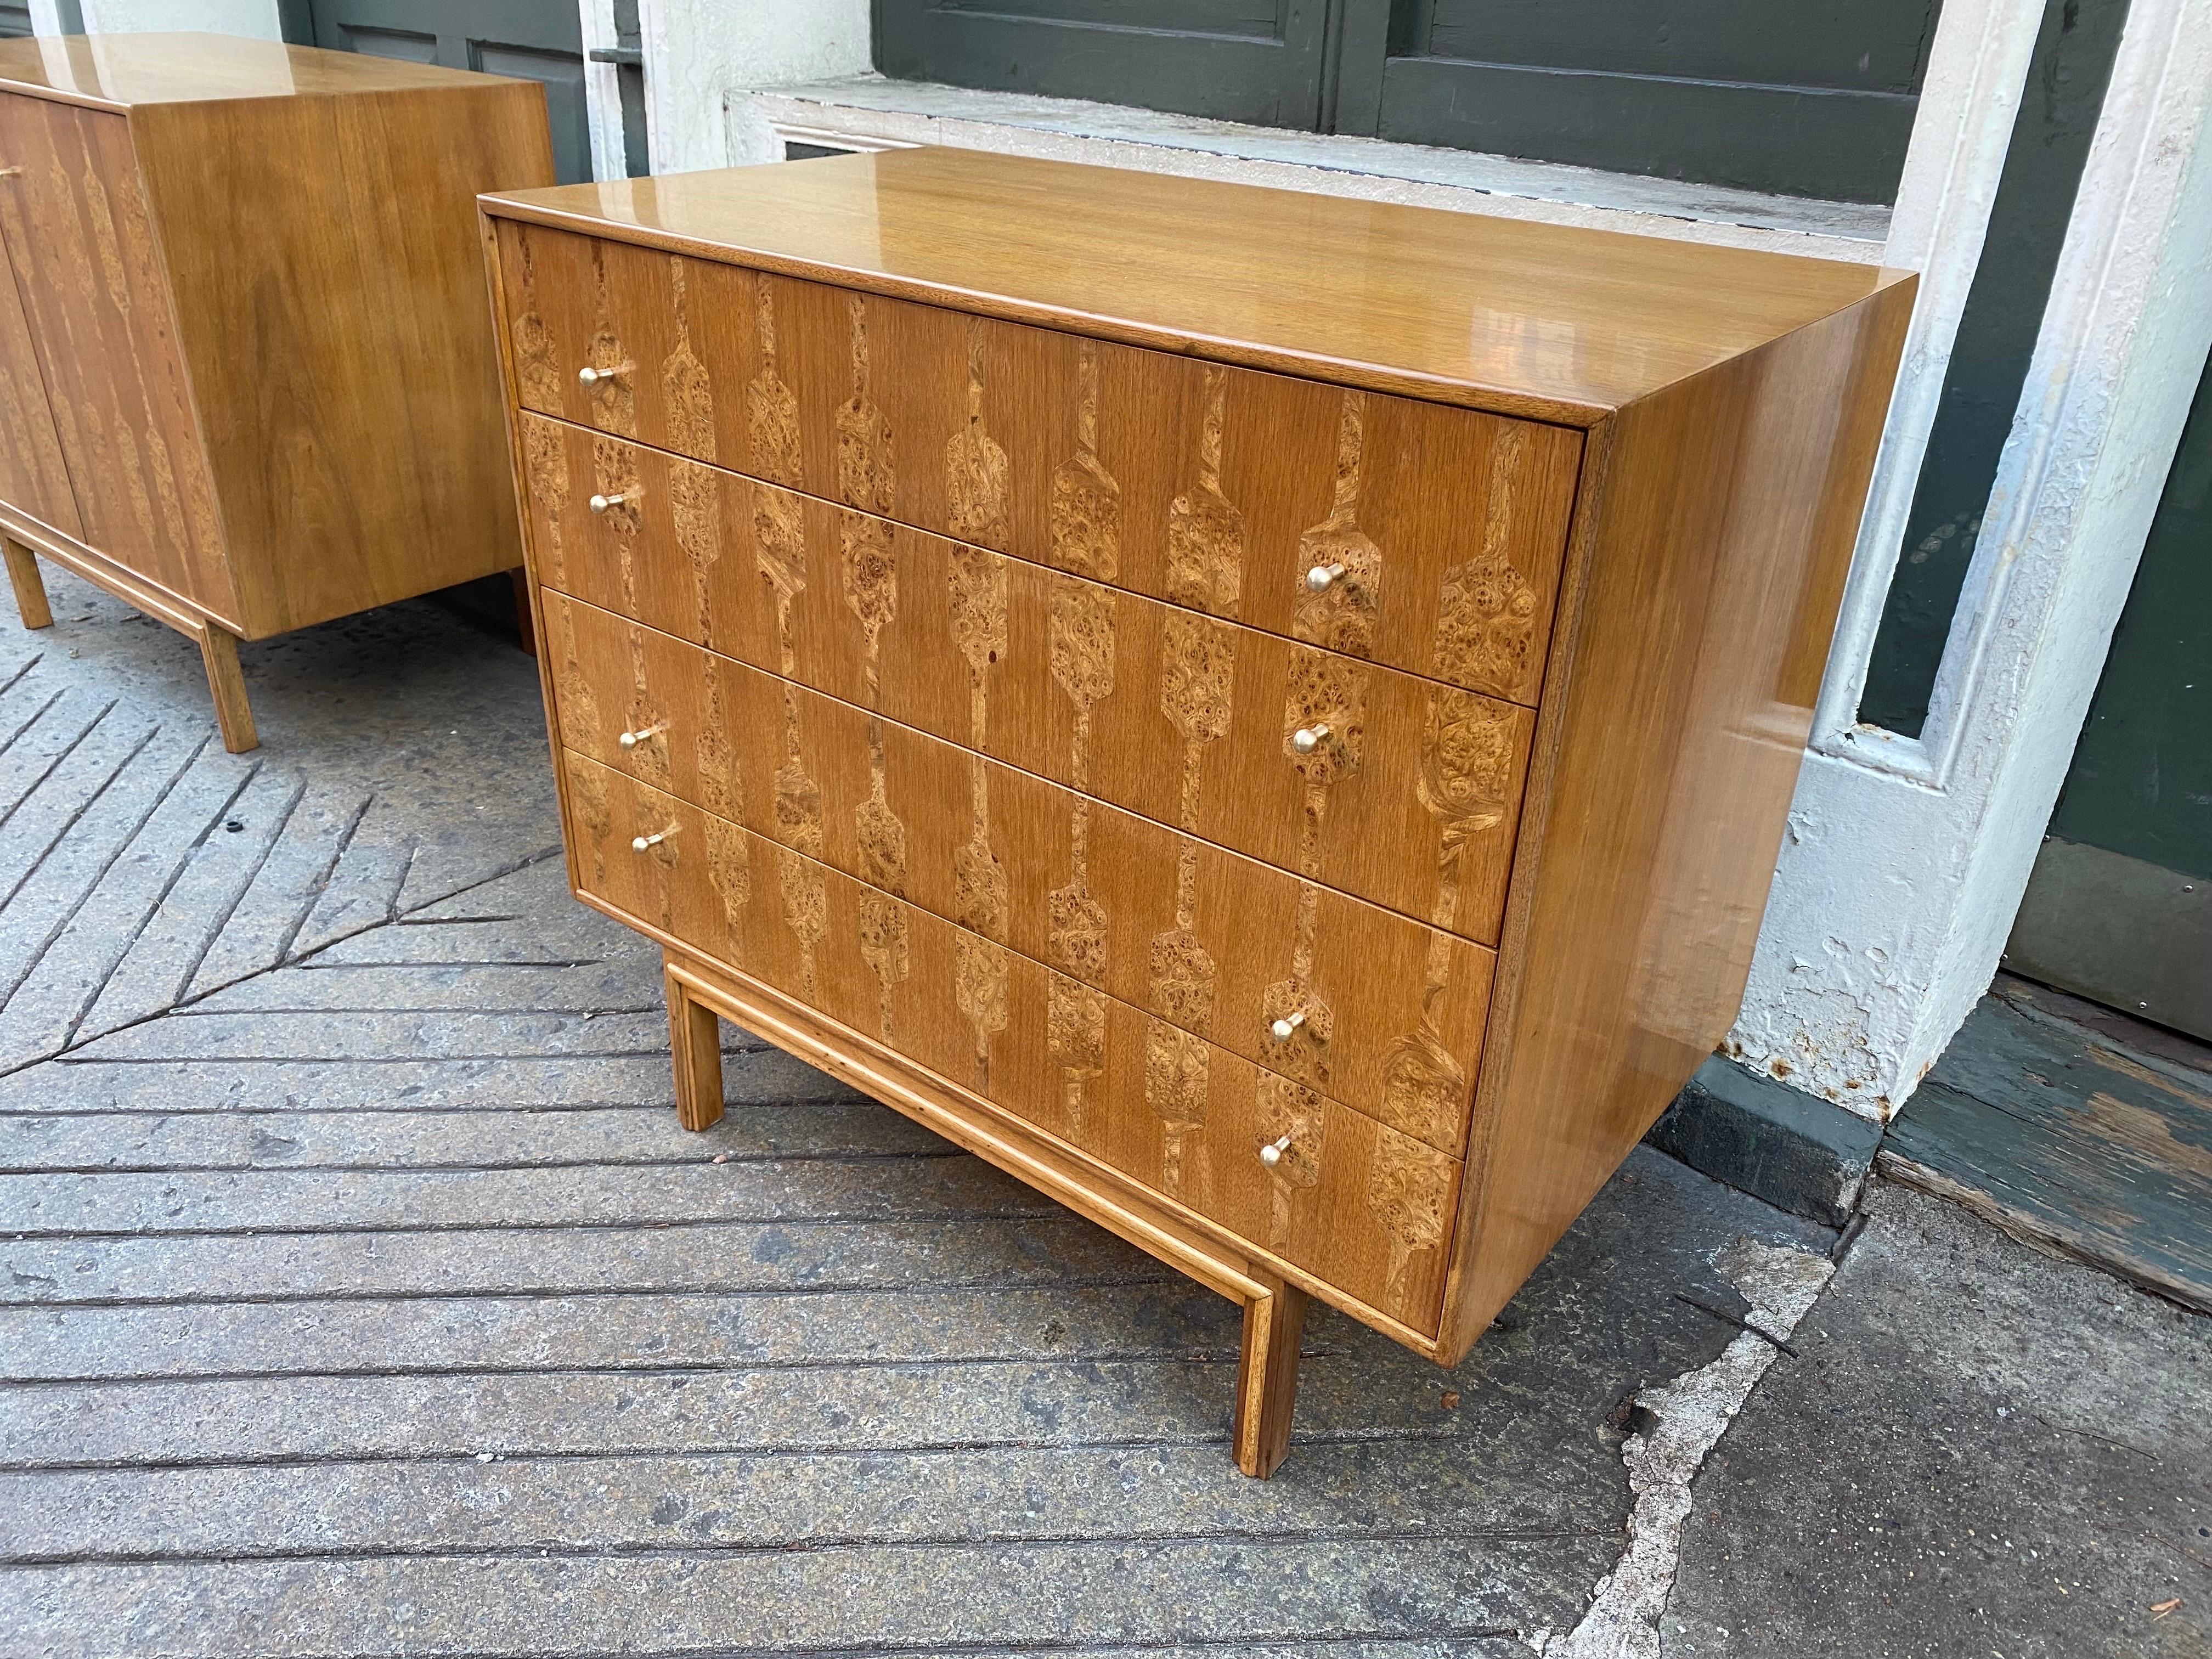 Romweber 4 drawer Dresser. Newly refinished and ready to go! Beautiful inlay olive ash burl. 4 drawers with 2 brass knobs per drawer. Second 2 door cabinet available as well!.